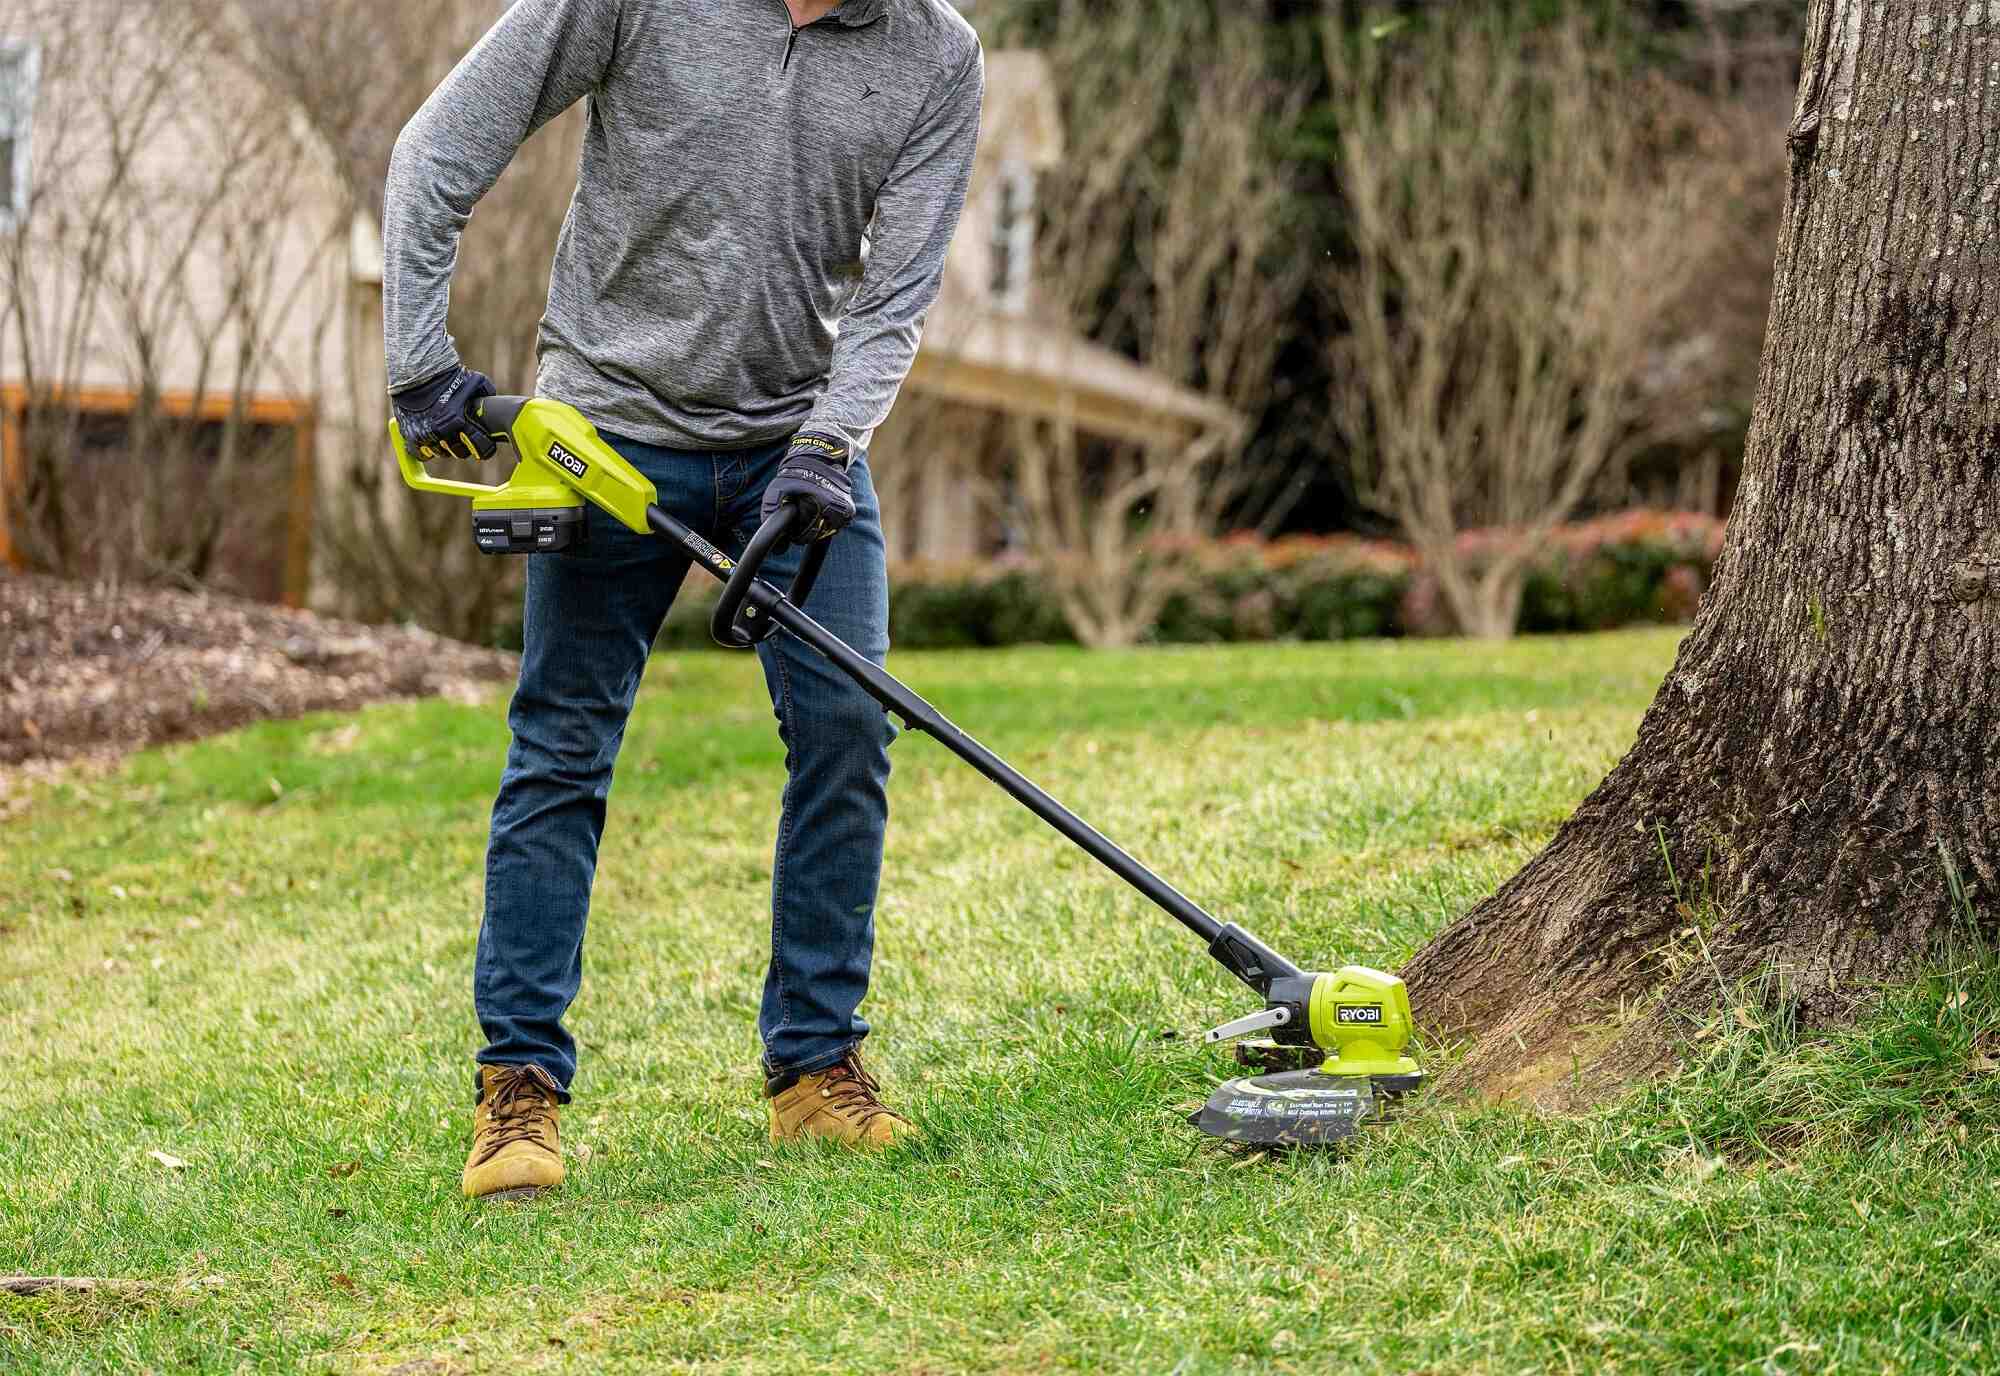 How To Use Ryobi Trimmer As Edger